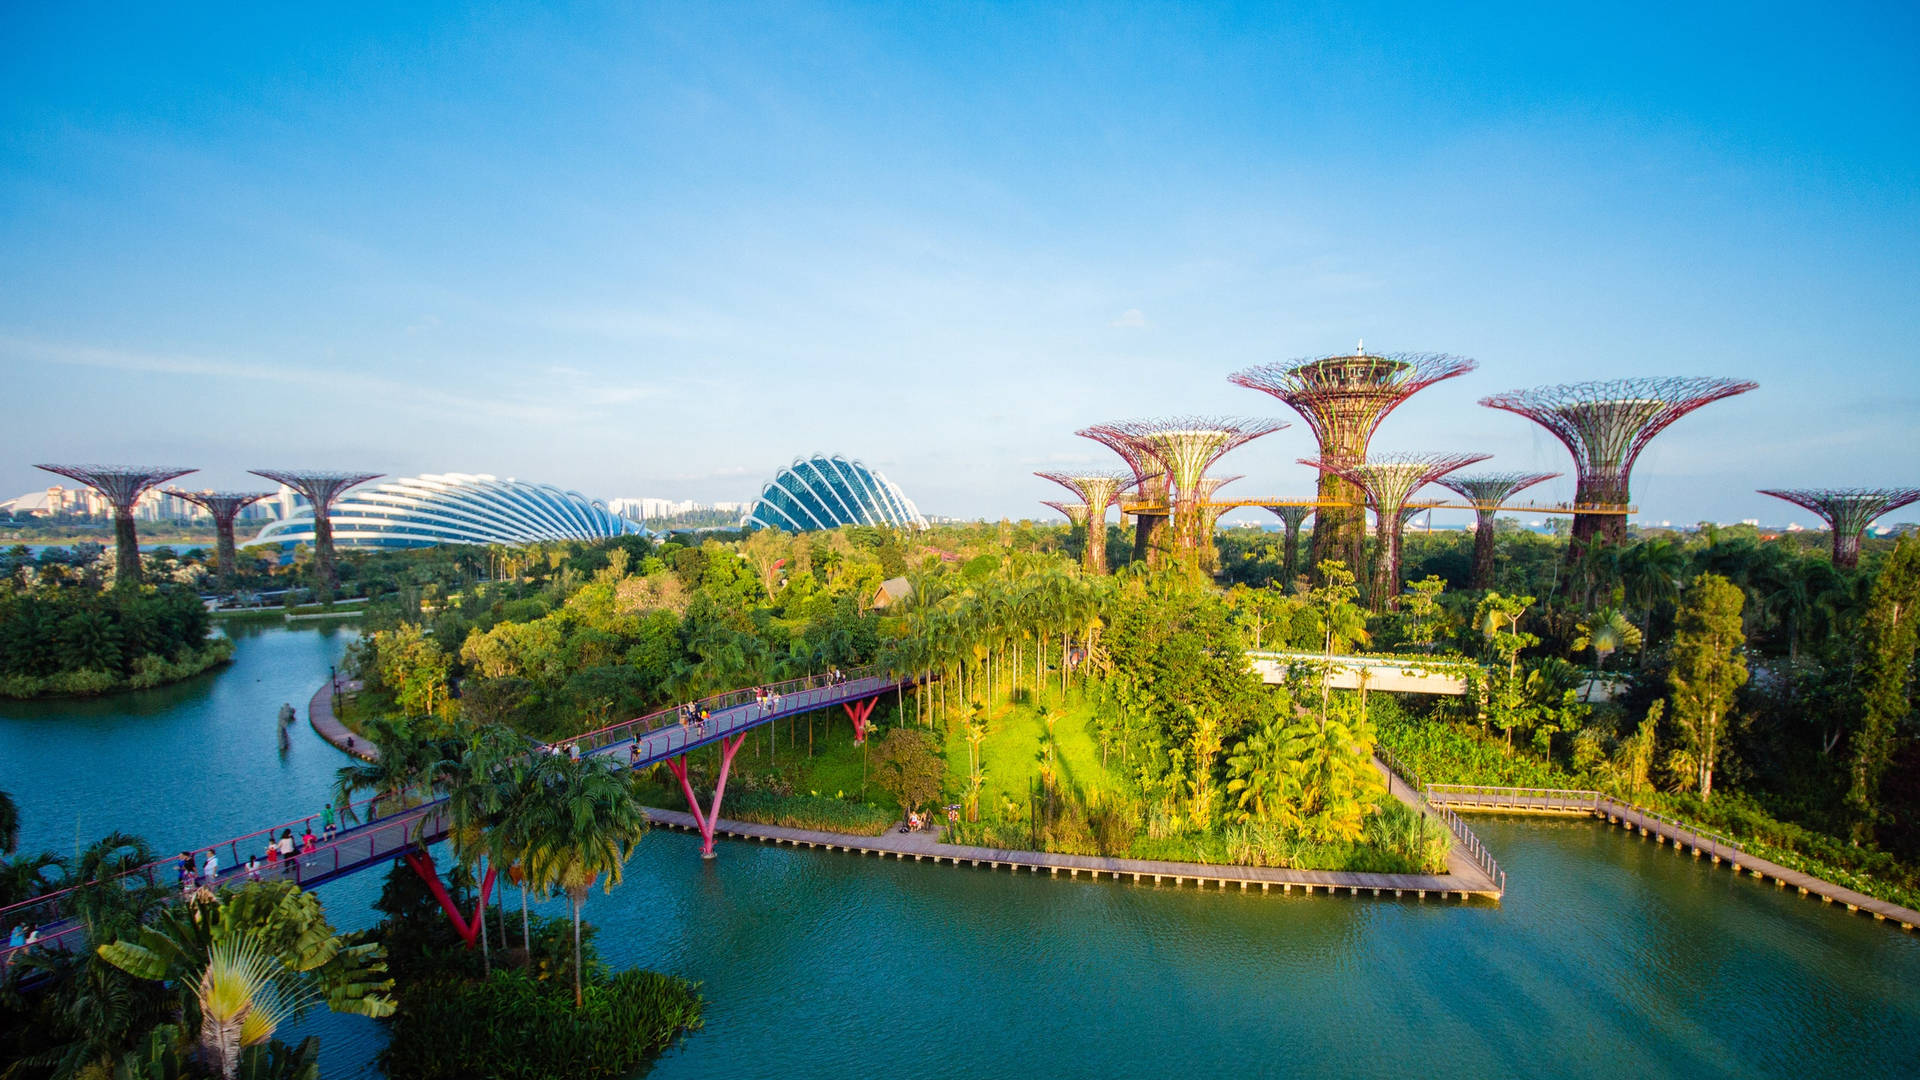 Singapore's Gardens By The Bay Background